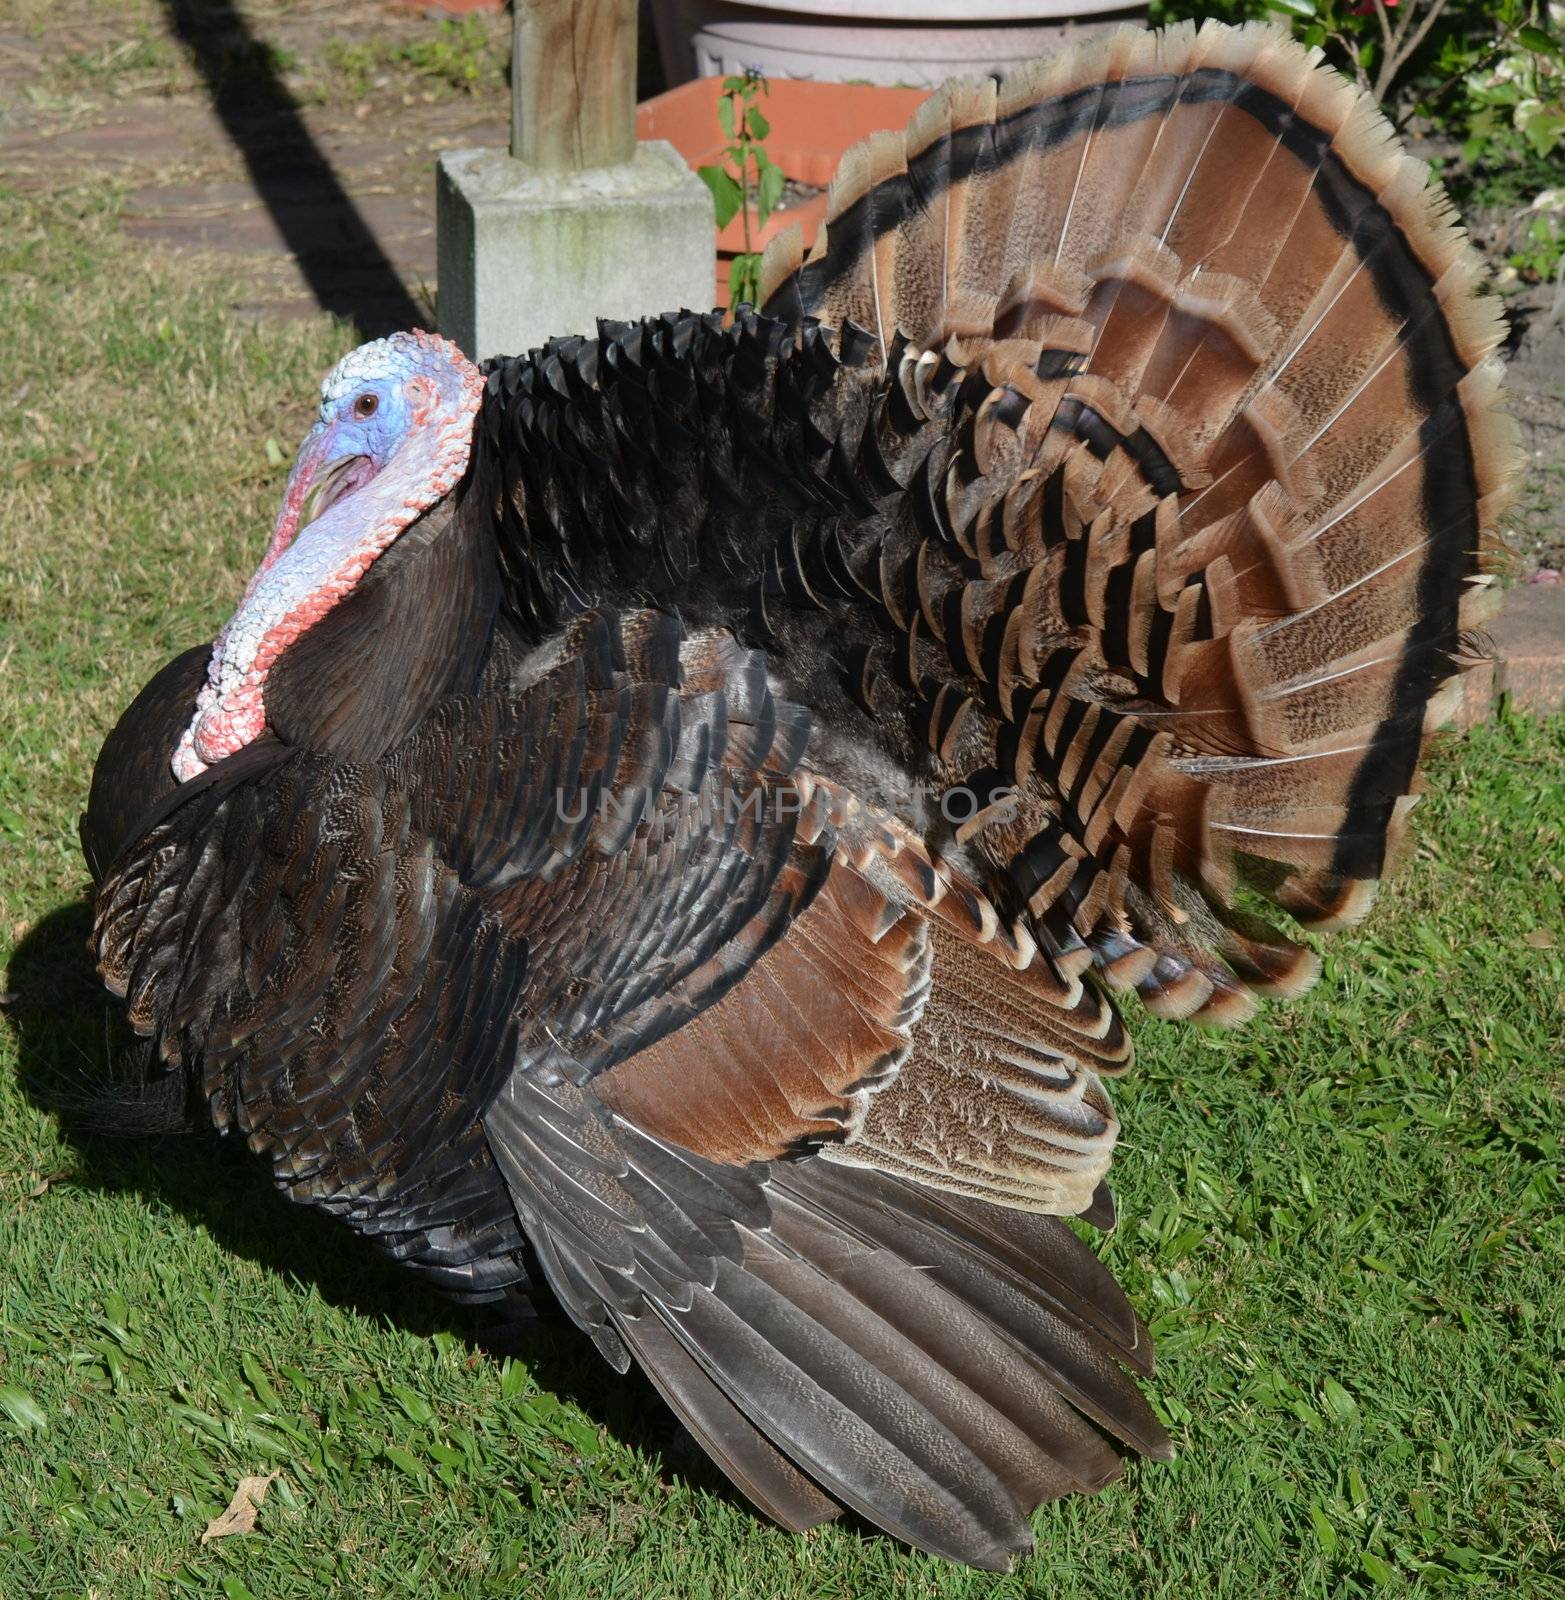 American turkey full tail showing on the grass